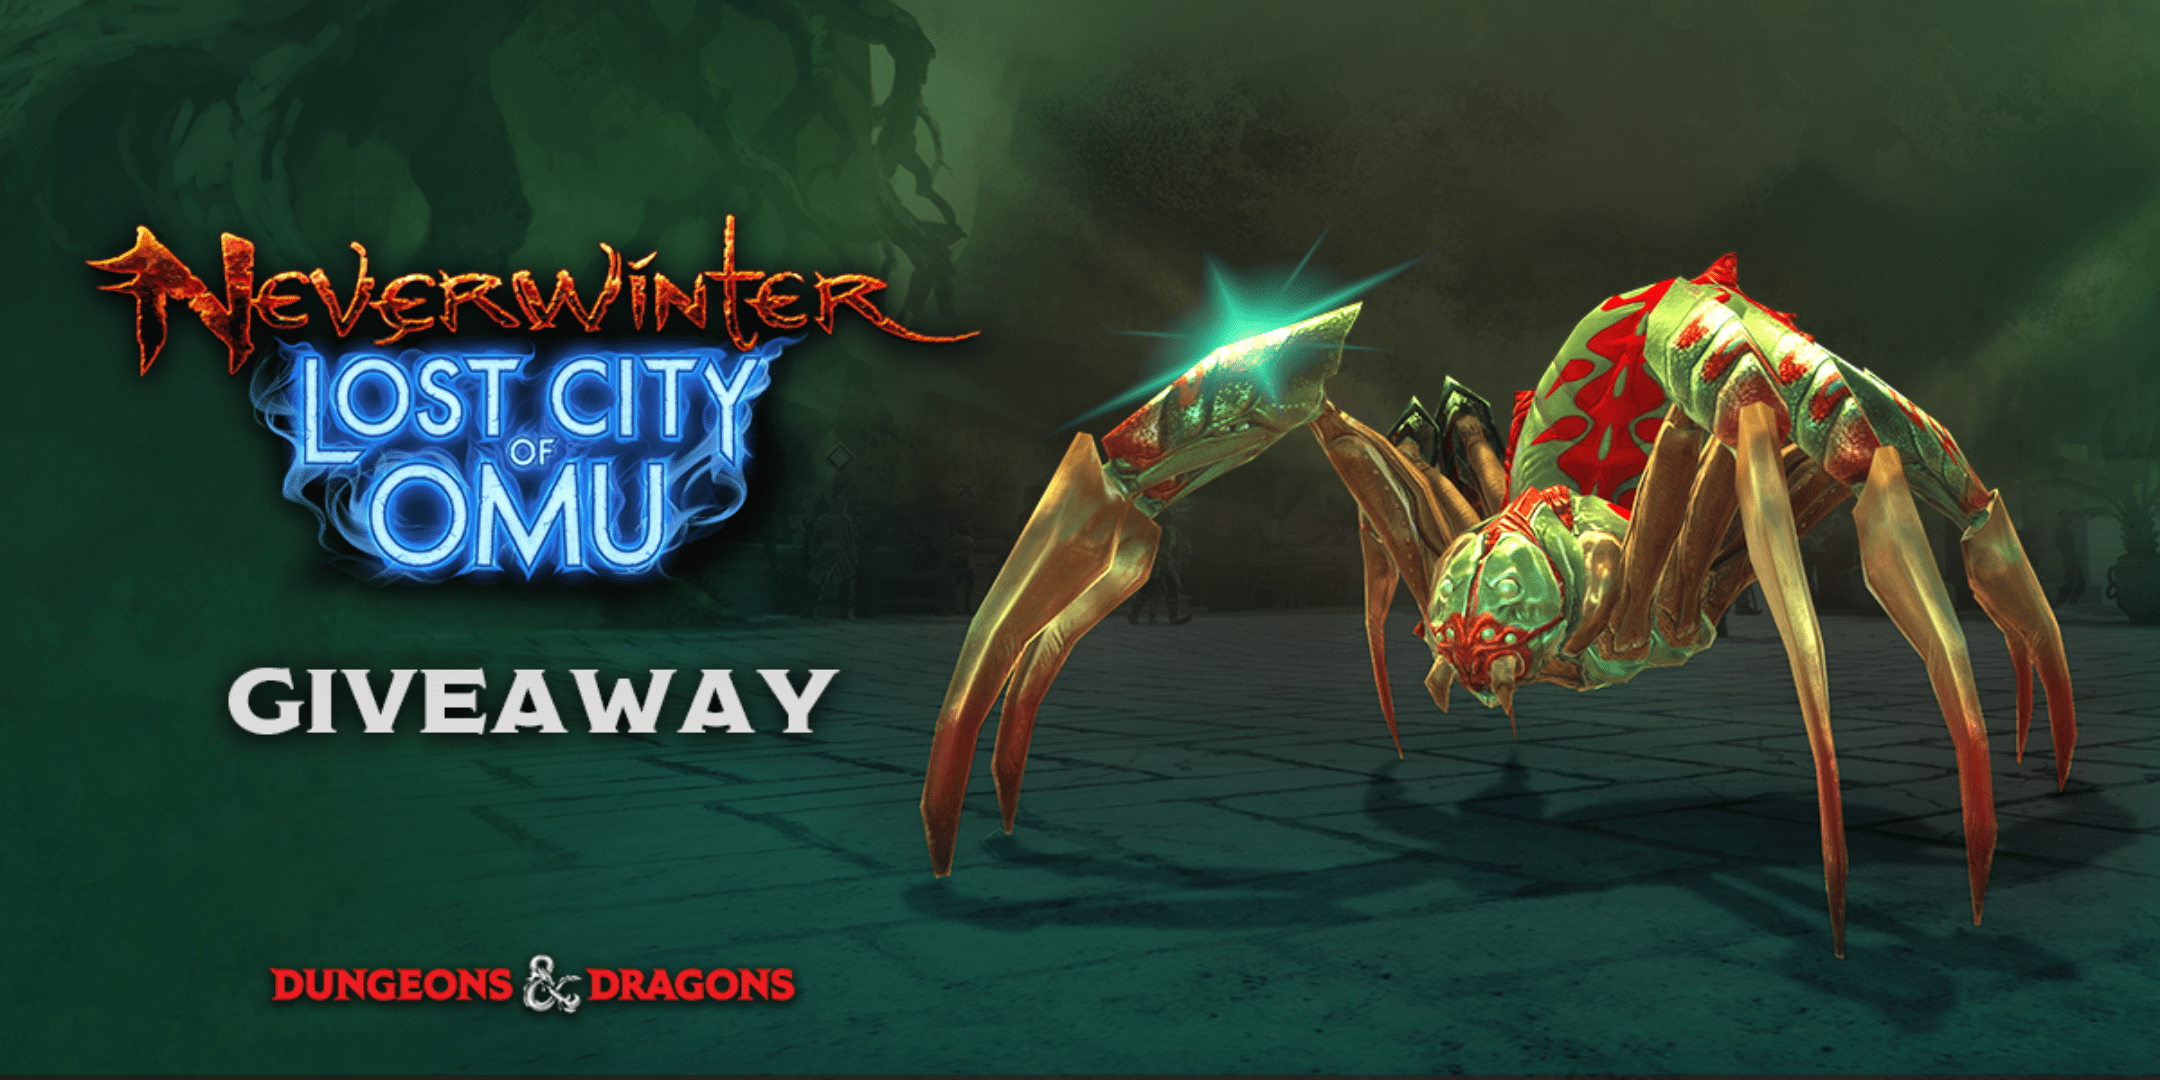 Neverwinter Lost City of Omu Xbox One/PS4 Mount Giveaway